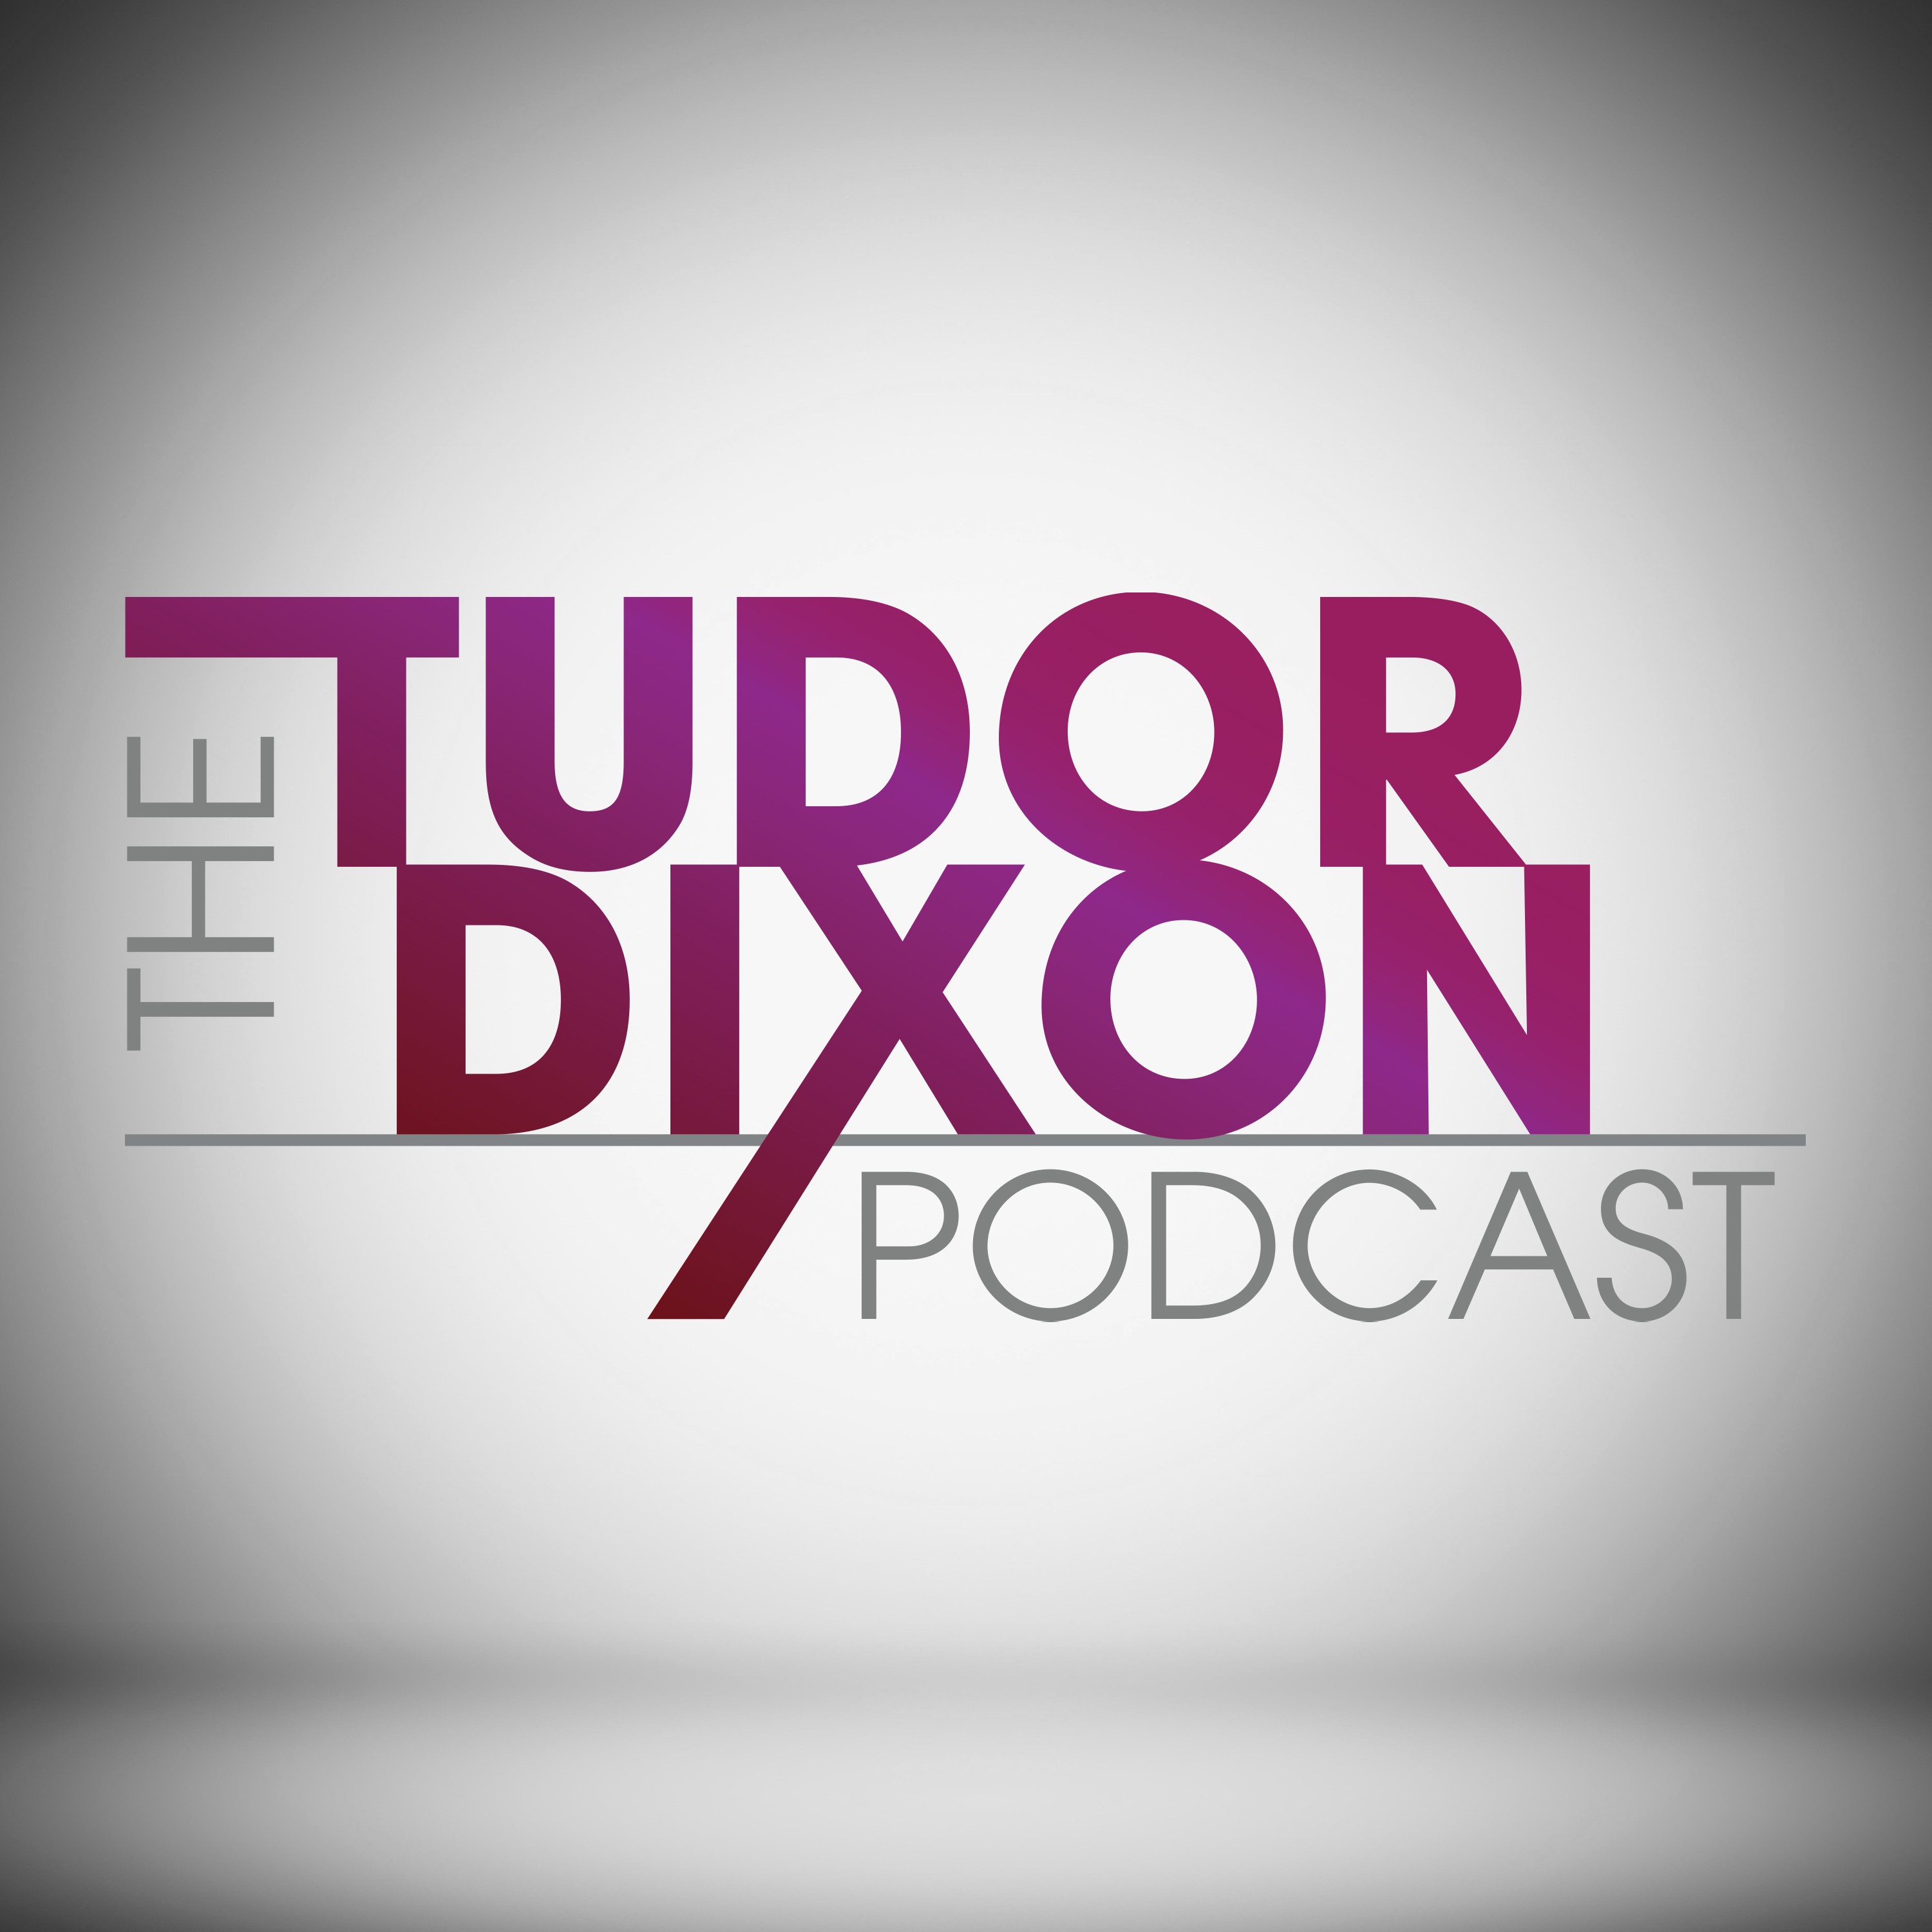 The Tudor Dixon Podcast: From ESPN to Empowerment with Sage Steele